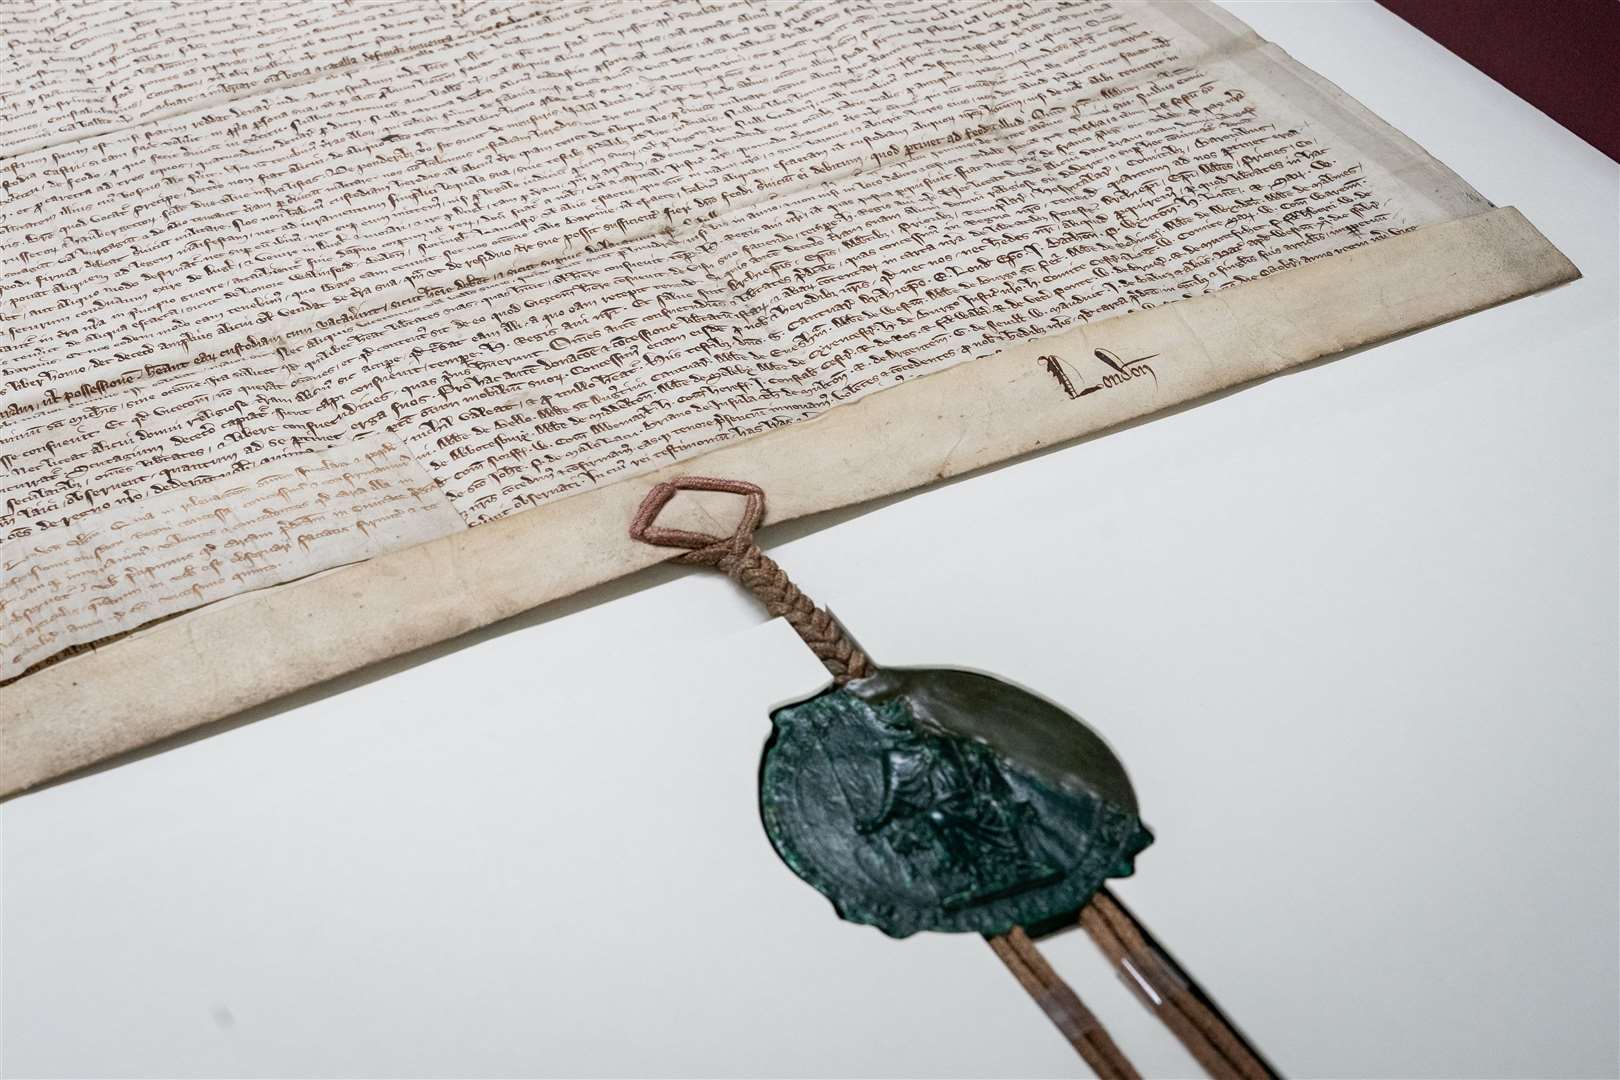 The 1297 Magna Carta document (Aaron Chown/PA)